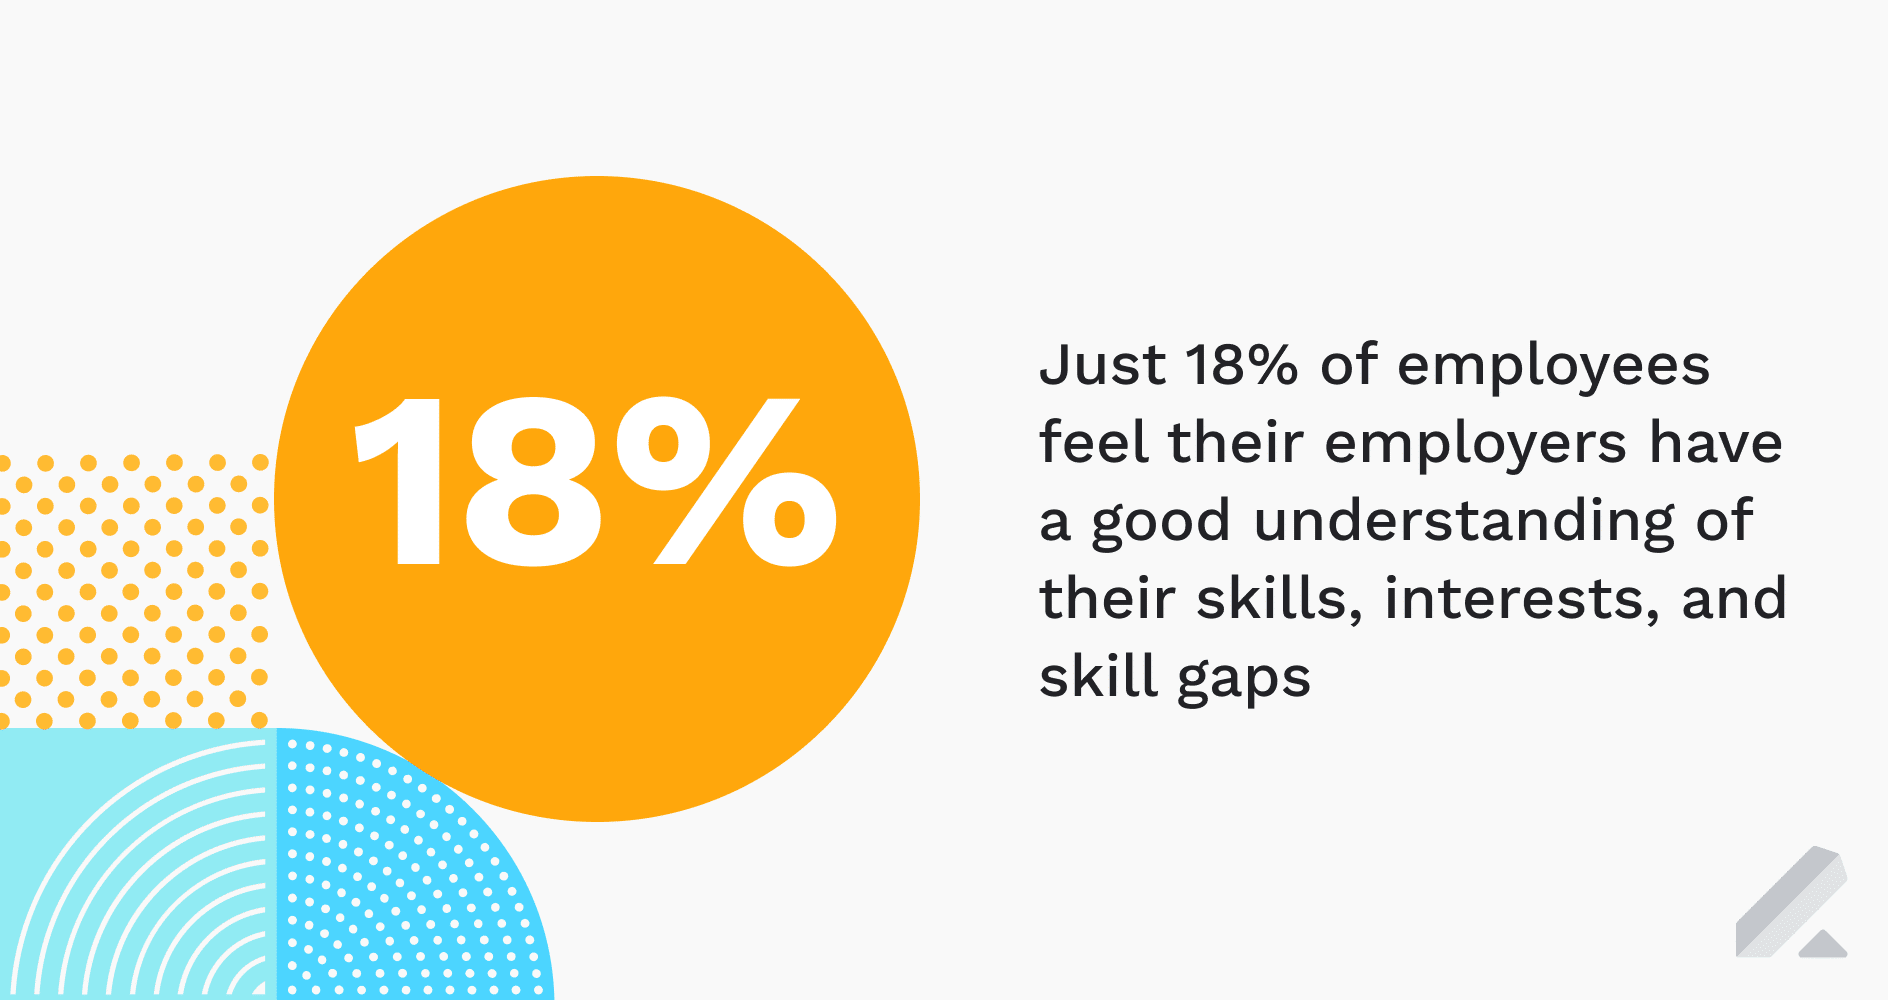 18% of employees feel their employers understand their skills